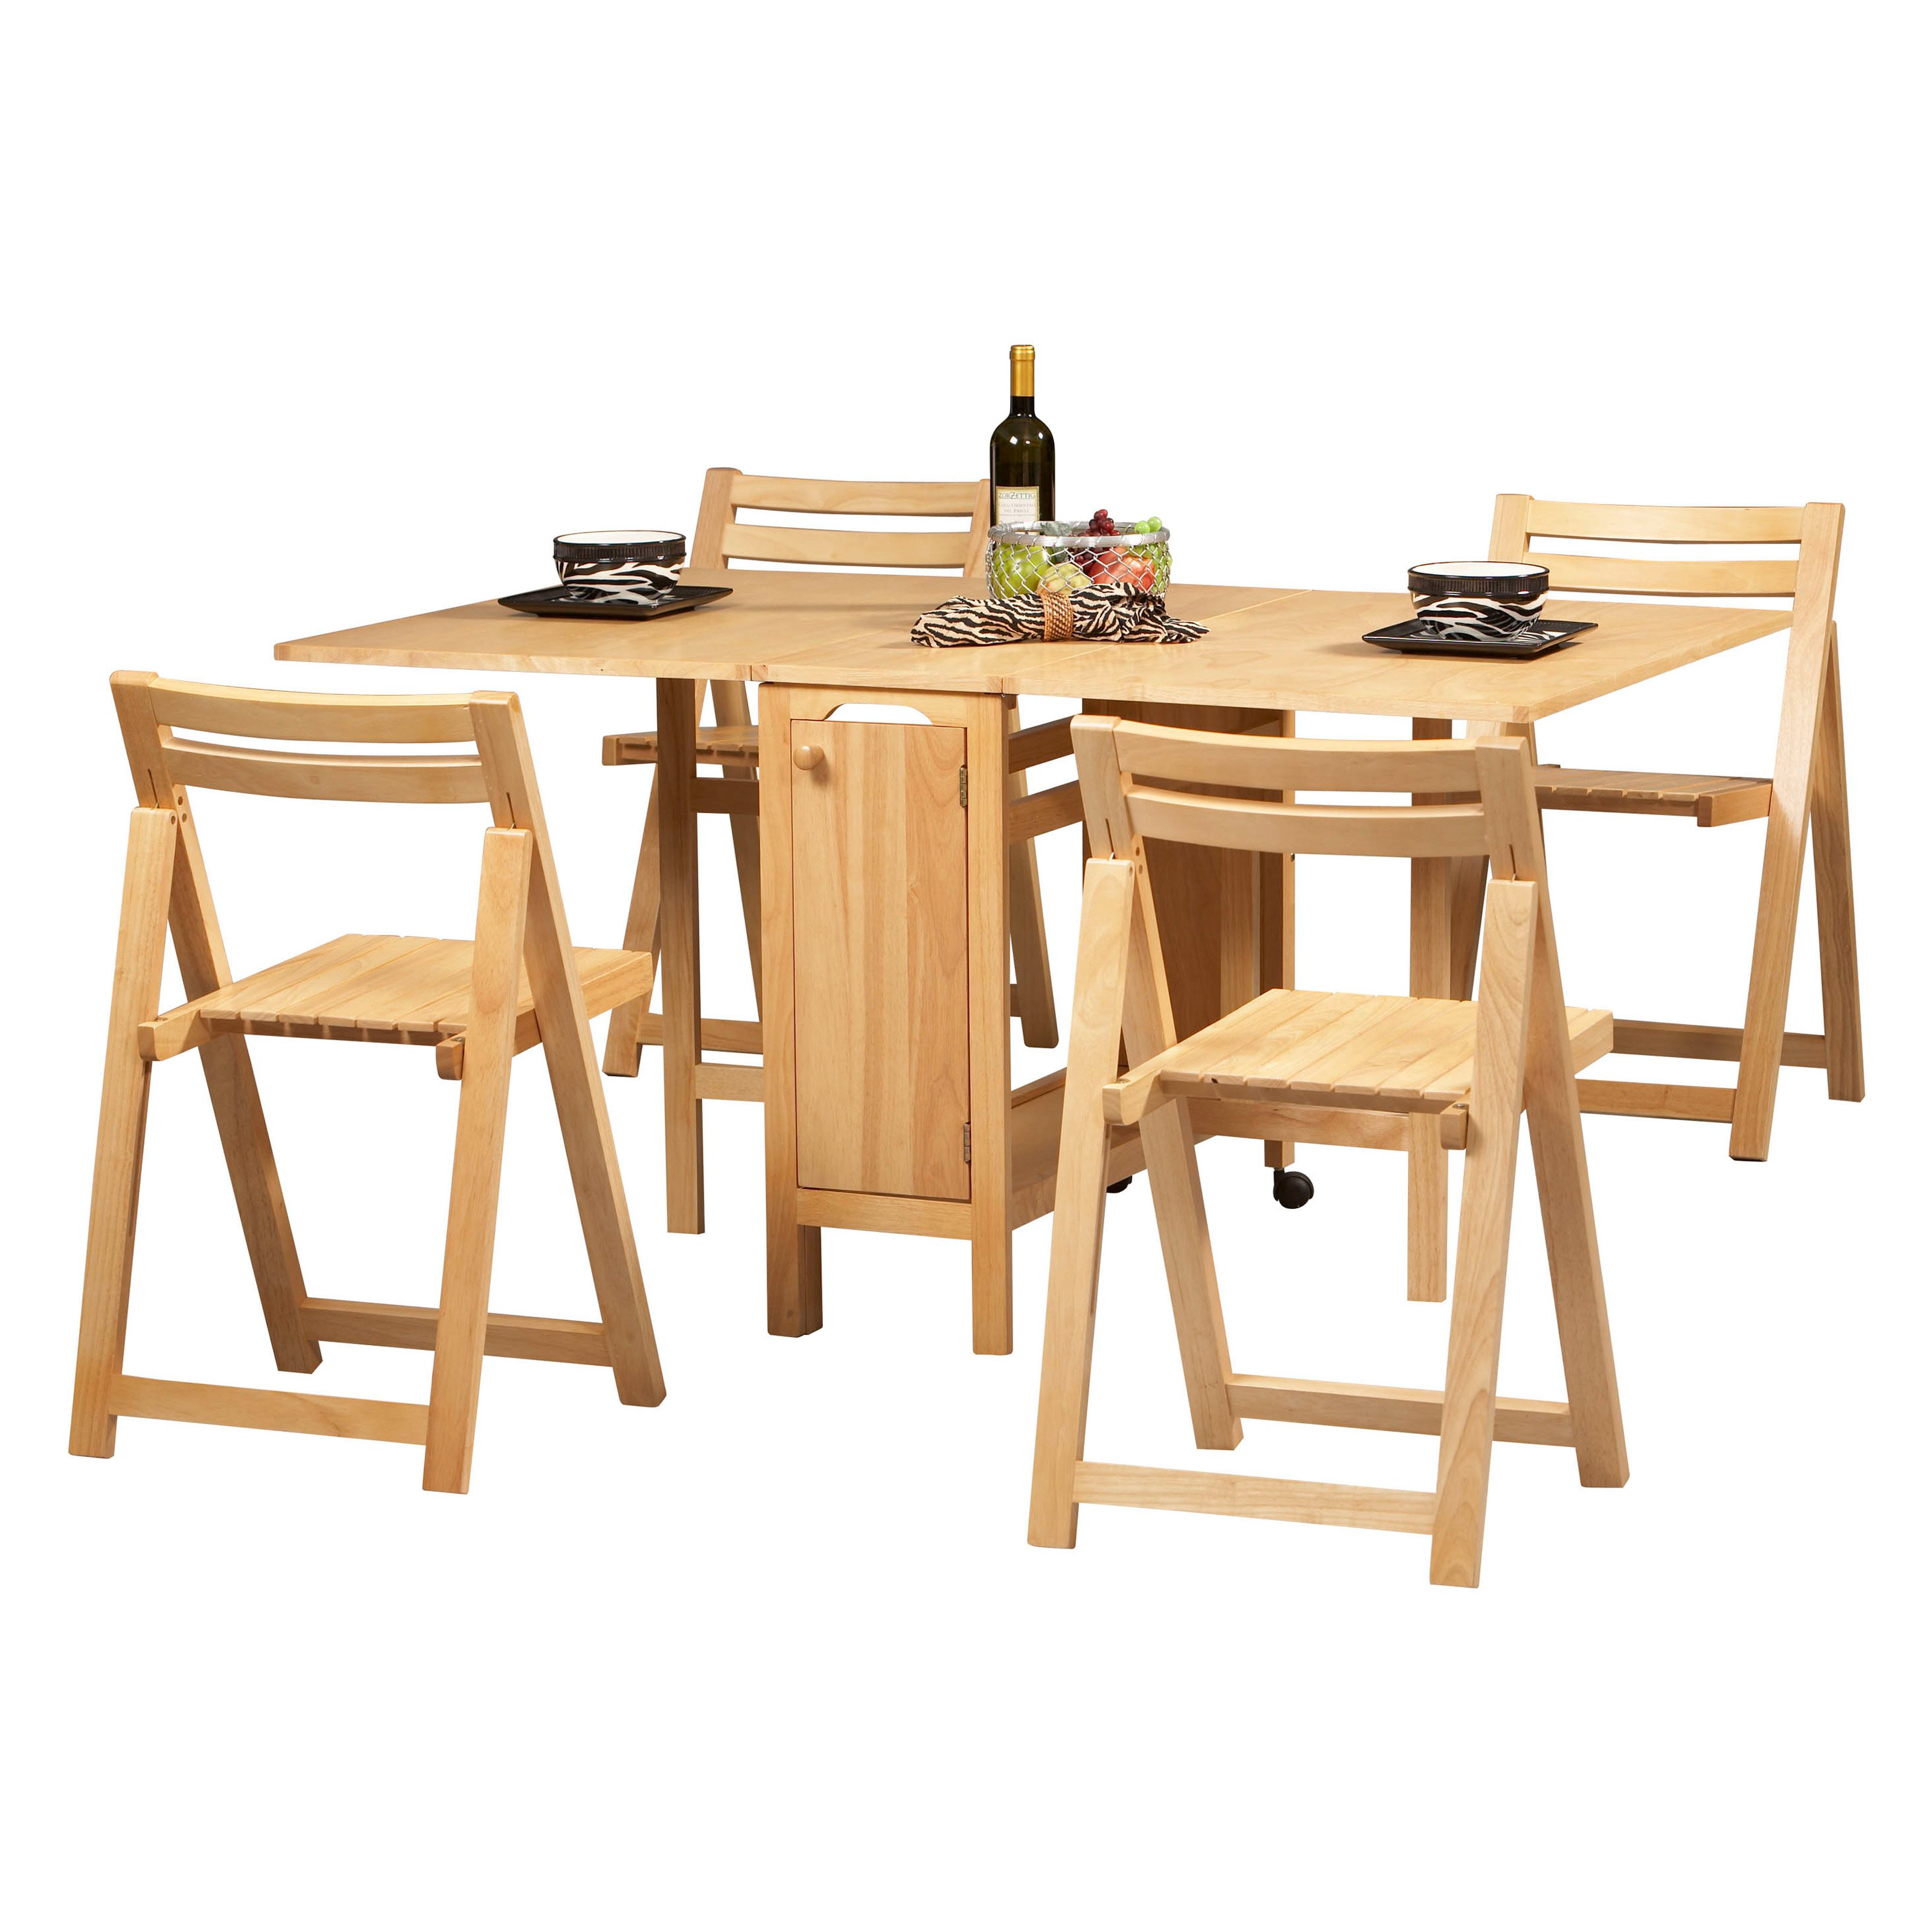 Folding Kitchen Table And Chairs 9 6903 